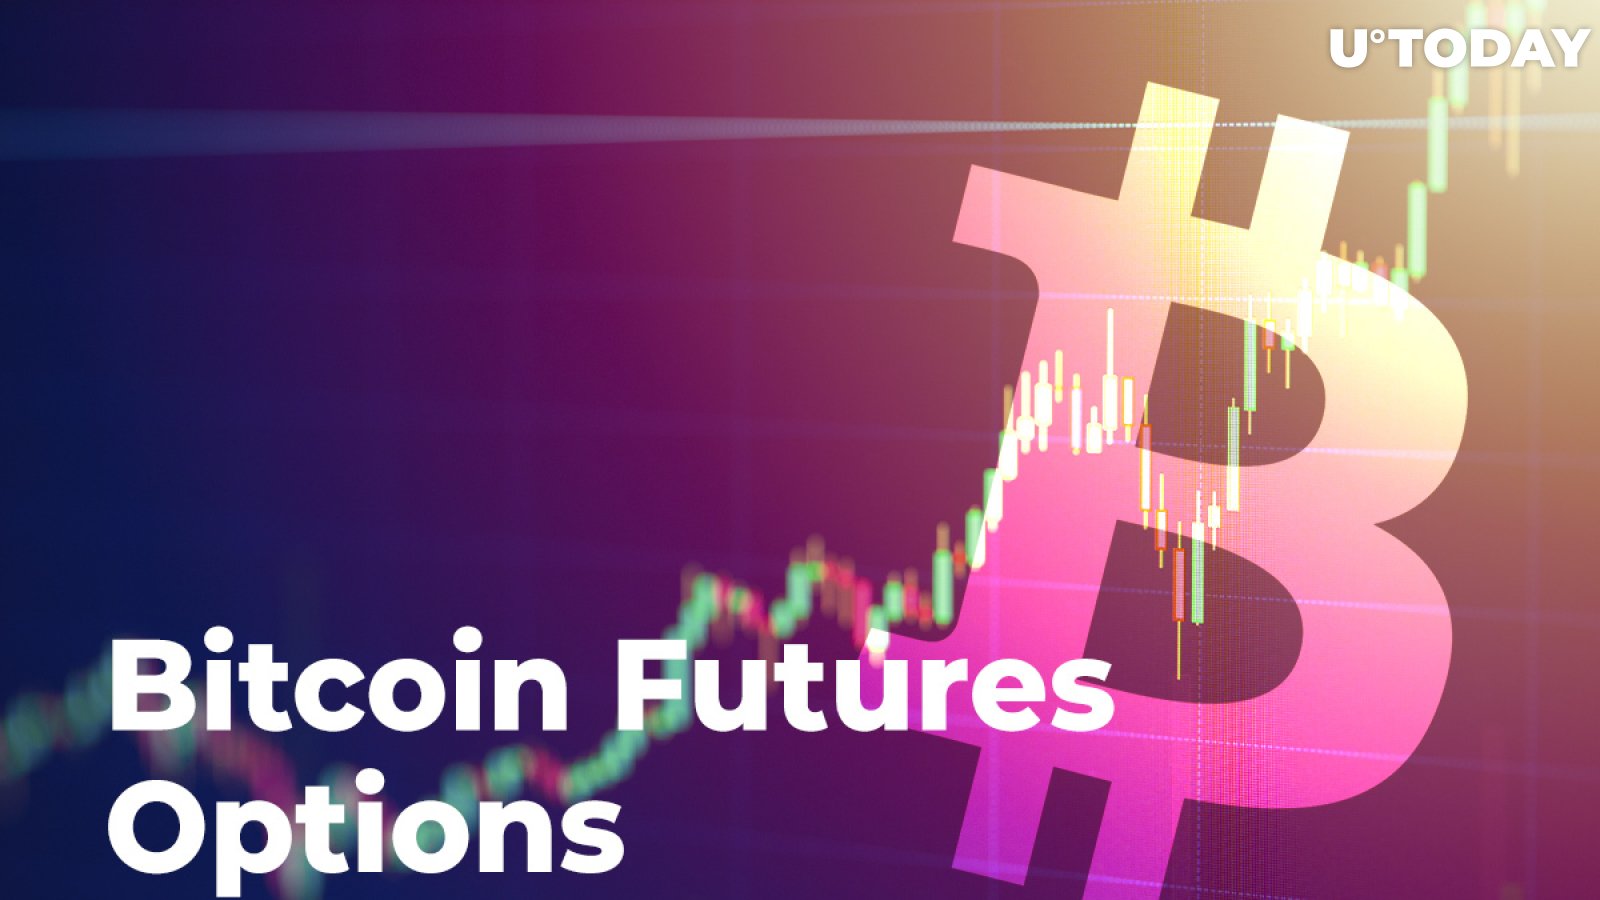 cme bitcoin options on futures